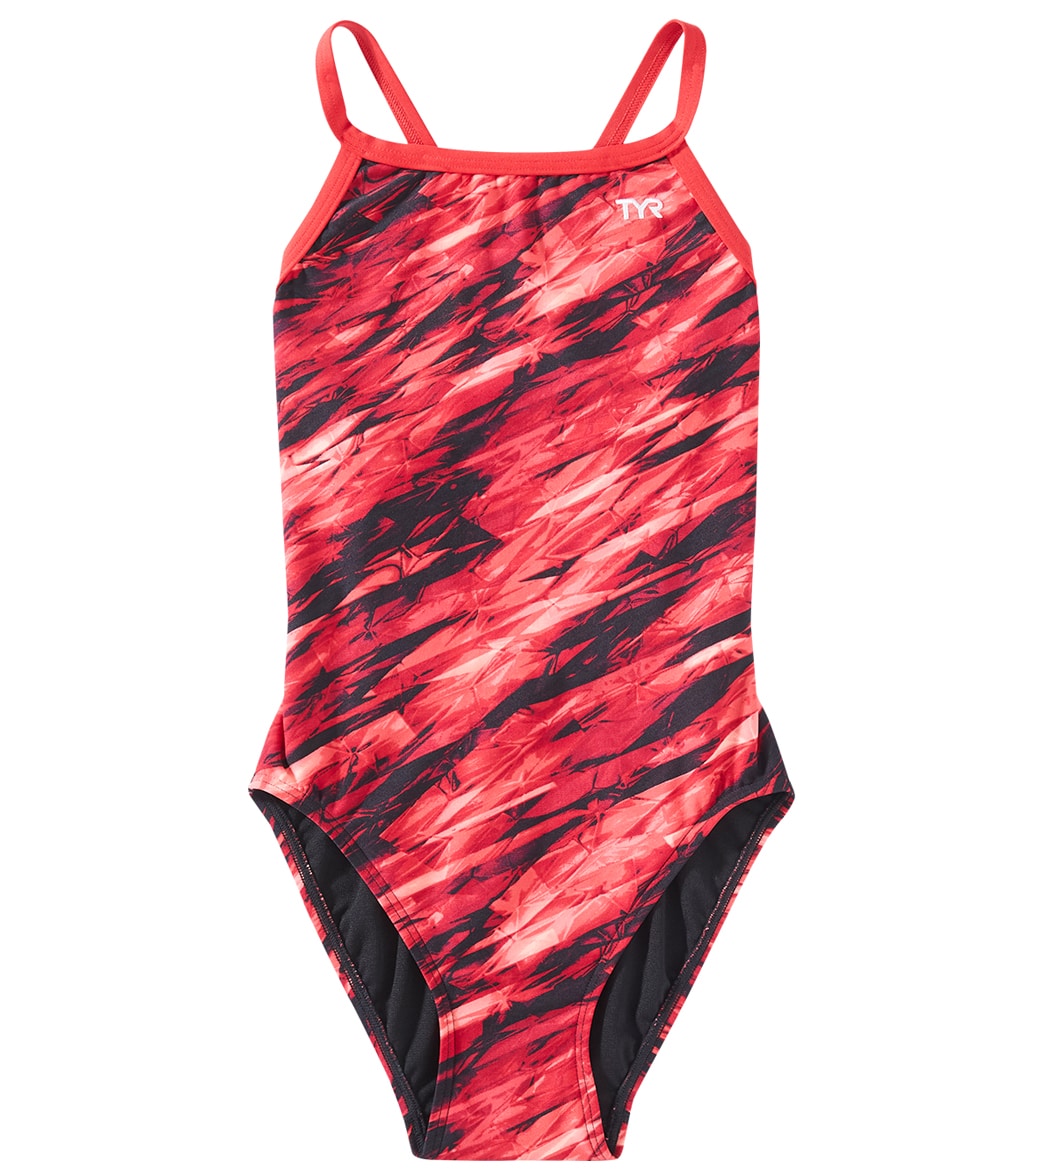 TYR Girls' Vitric Diamondfit One Piece Swimsuit - Red 22 - Swimoutlet.com